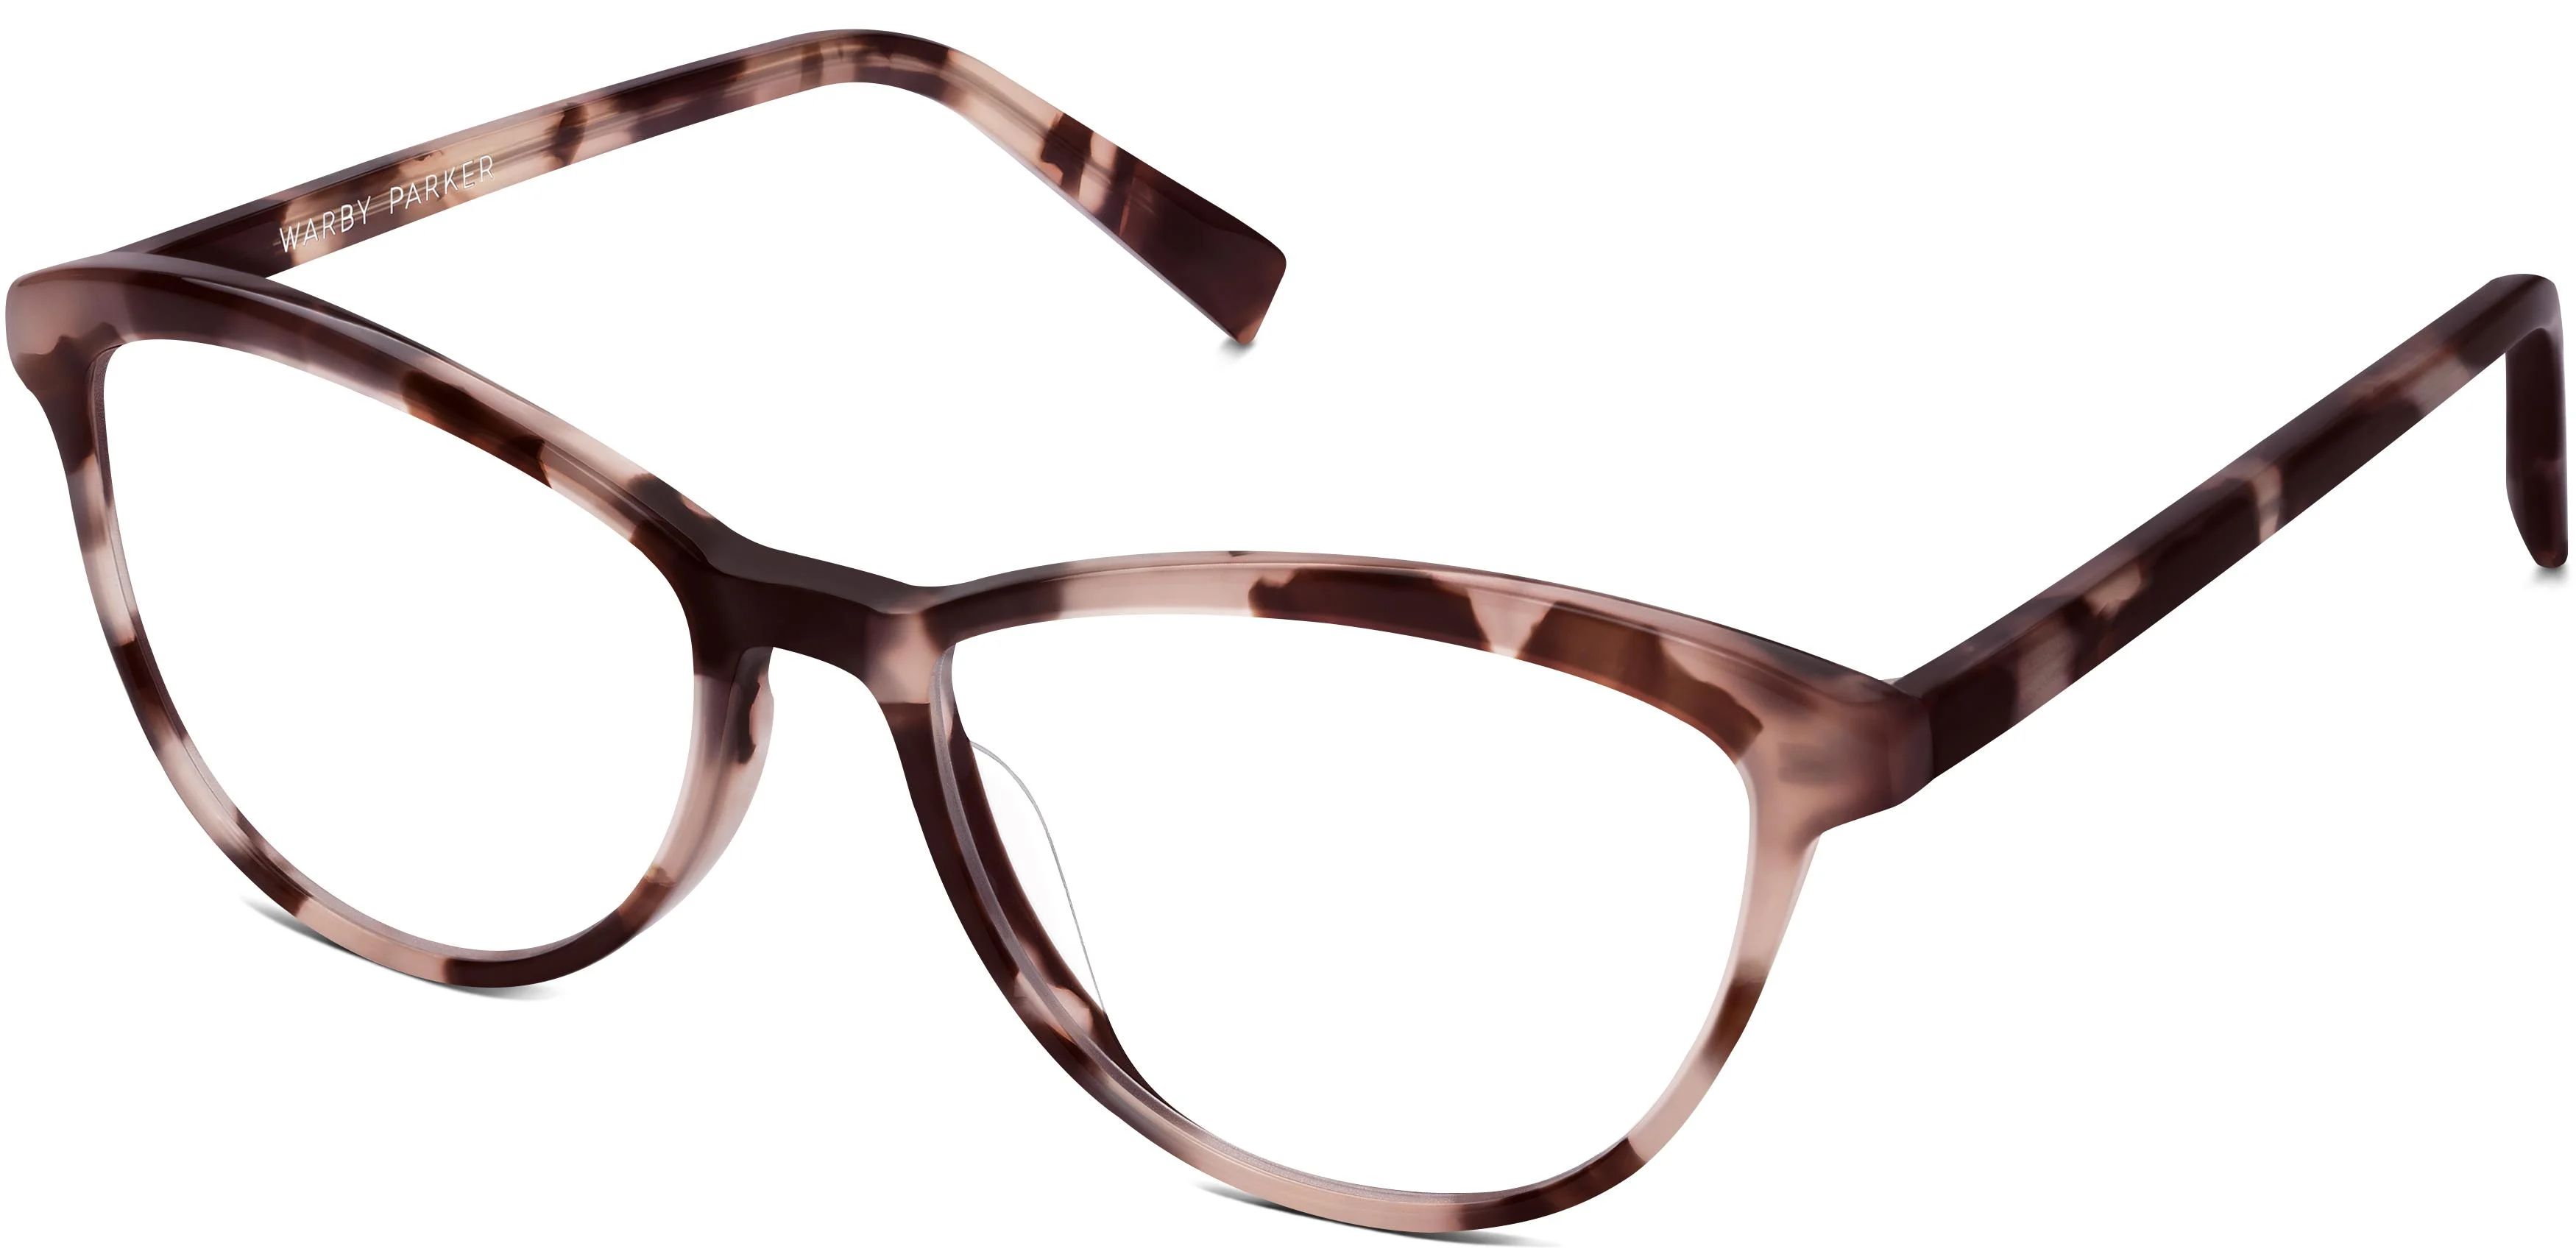 Louise Eyeglasses in Blush Tortoise | Warby Parker | Warby Parker (US)